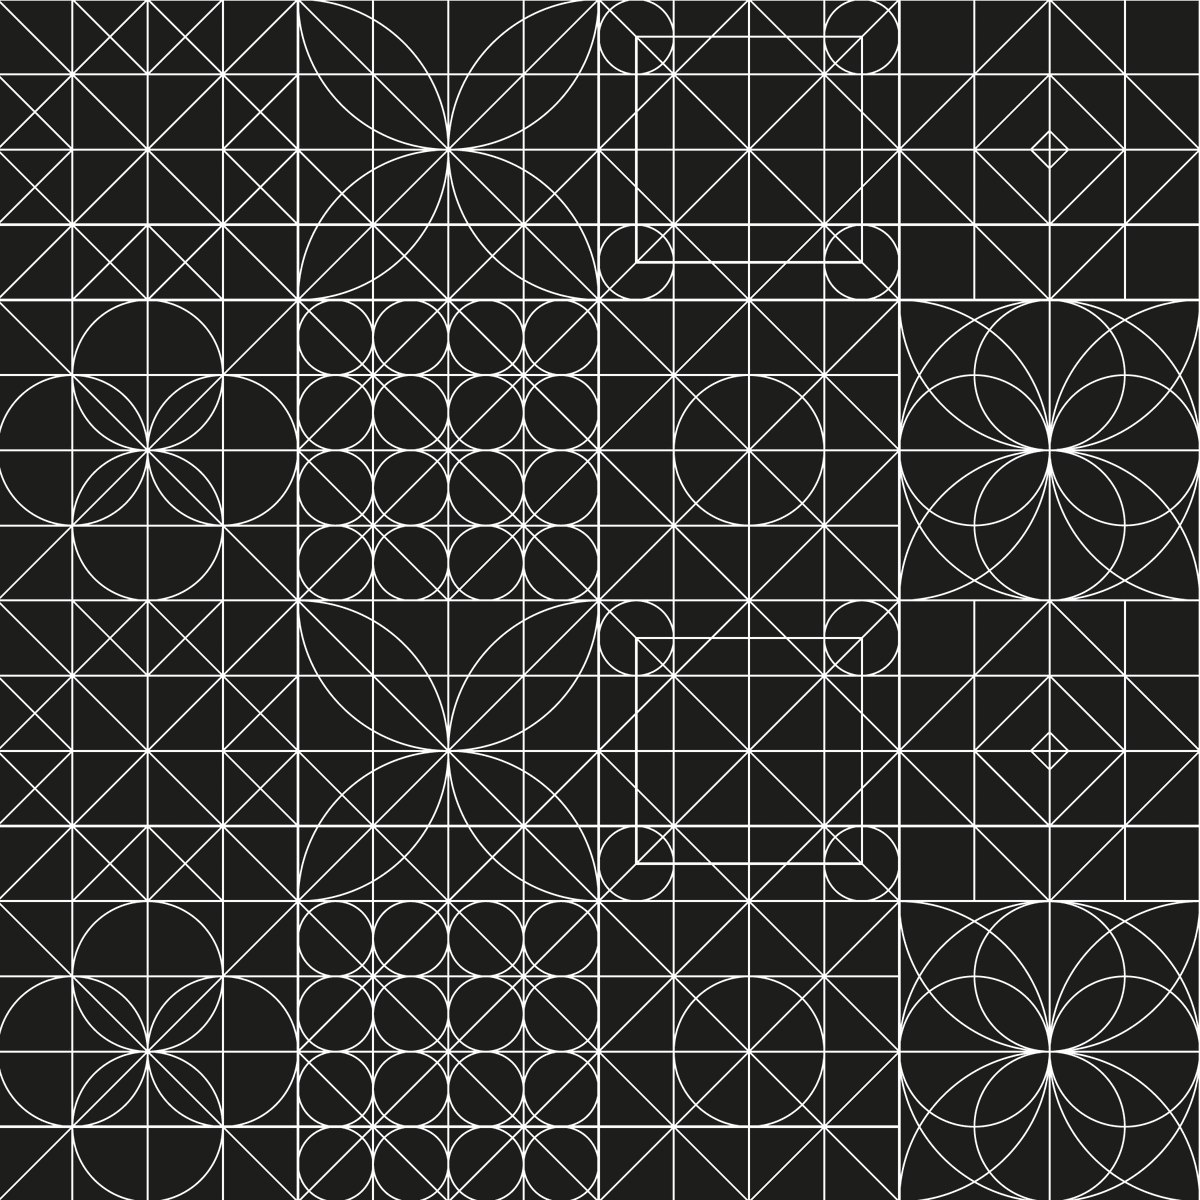 **Sneak peek** 

Coming soon to our store. Geo Mono Series.

🖤

#geometric #linework #georetro #monochrome #pattern #comingsoon #newcreative #typography #wrappingpaper #greetingcards #giftwrap #stationery #shopsmall #shopindependent #lovedesign #creativestationery